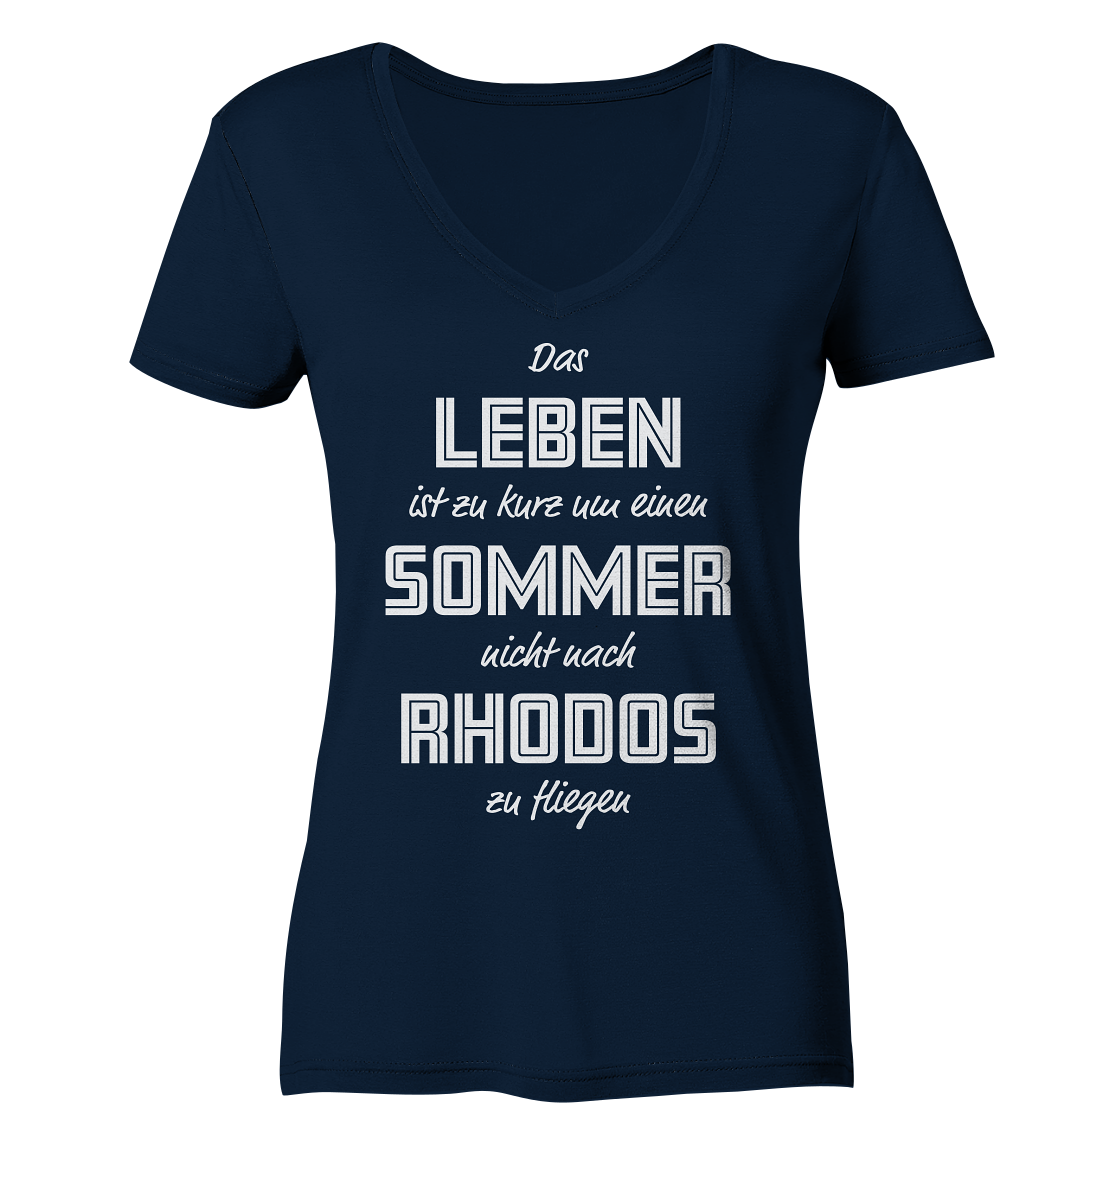 Life is too short not to fly to Rhodes for a summer - Ladies Organic V-Neck Shirt